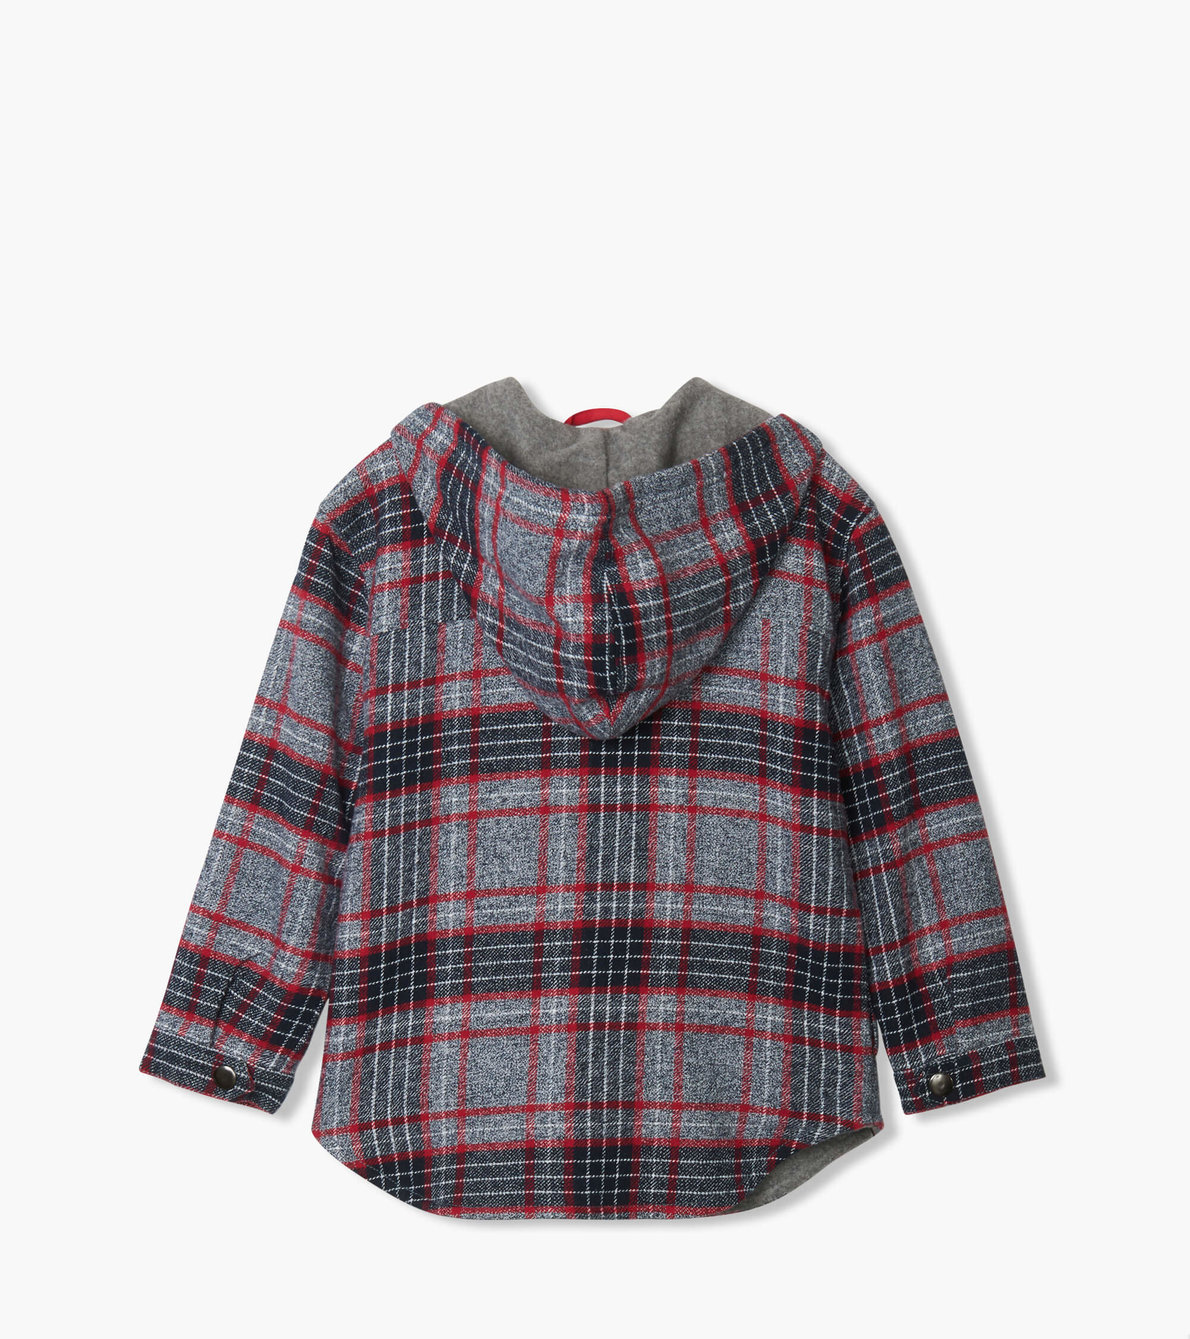 View larger image of Winter Plaid Woven Full Zip Hoodie